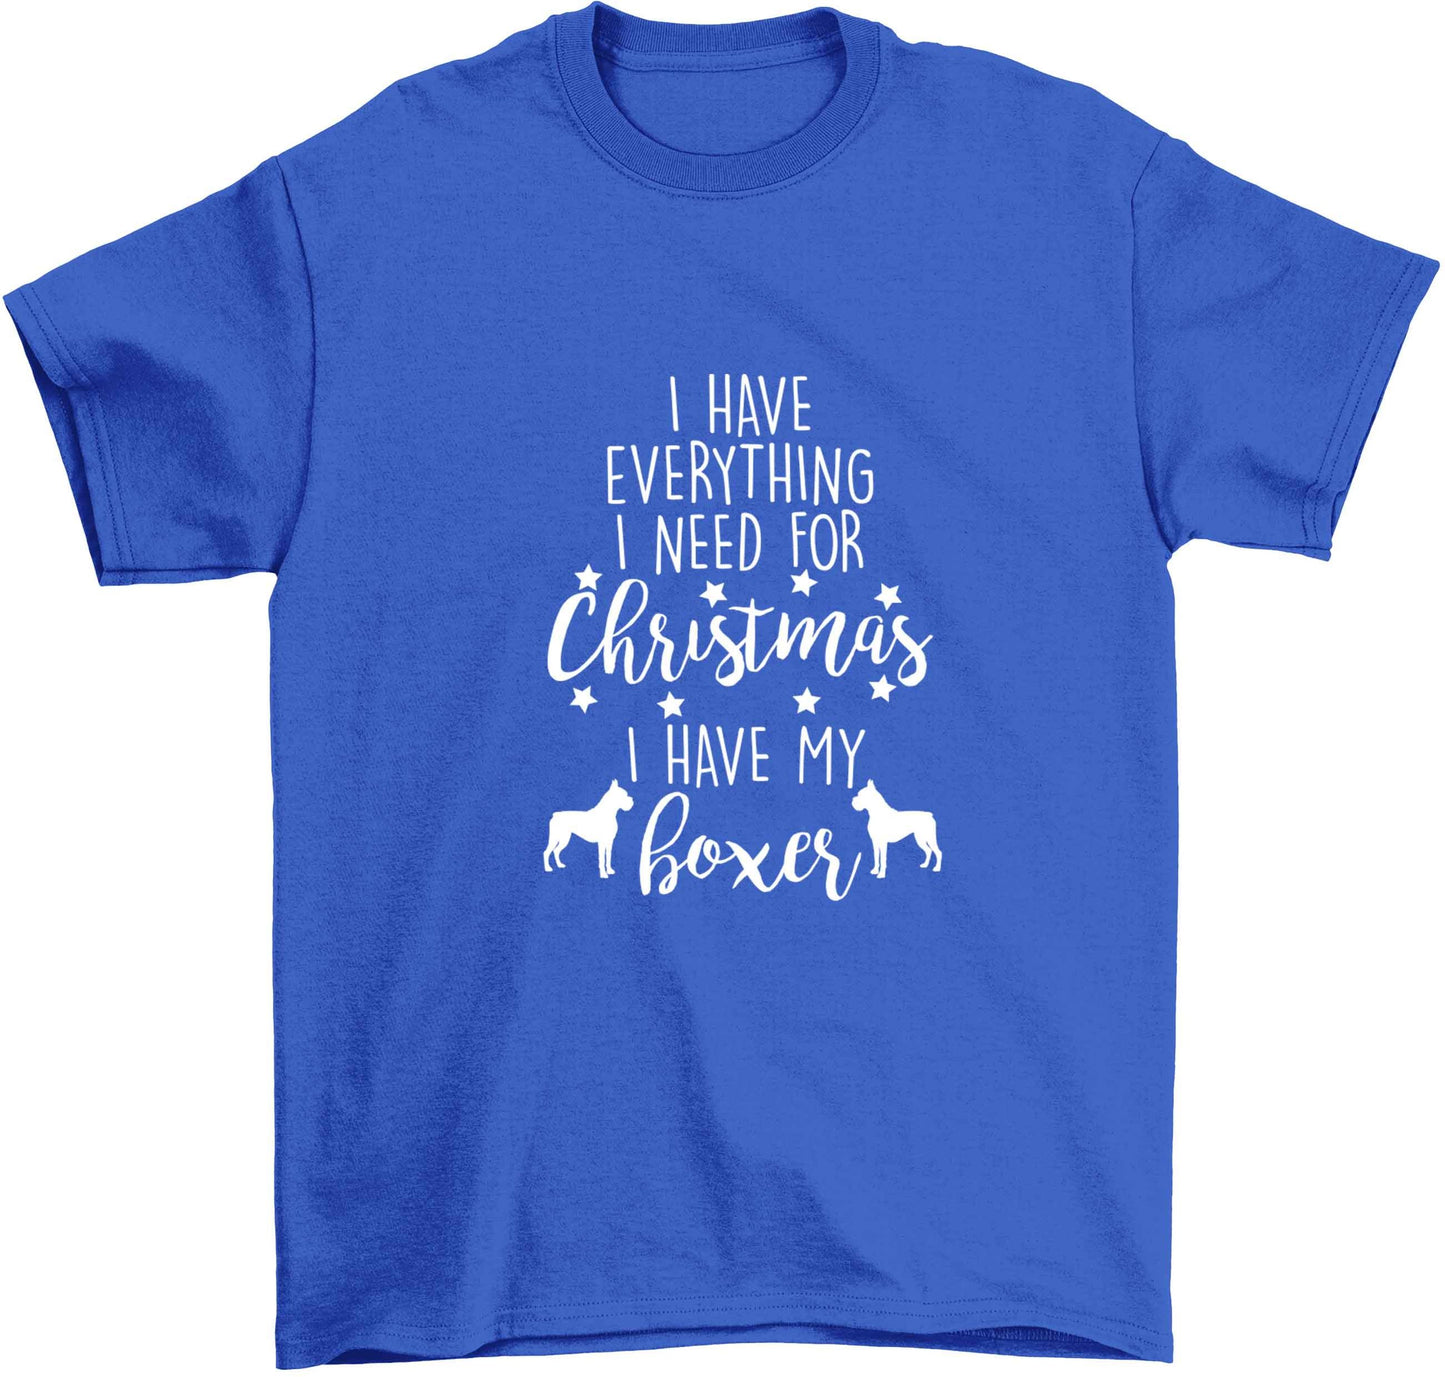 I have everything I need for Christmas I have my boxer Children's blue Tshirt 12-13 Years